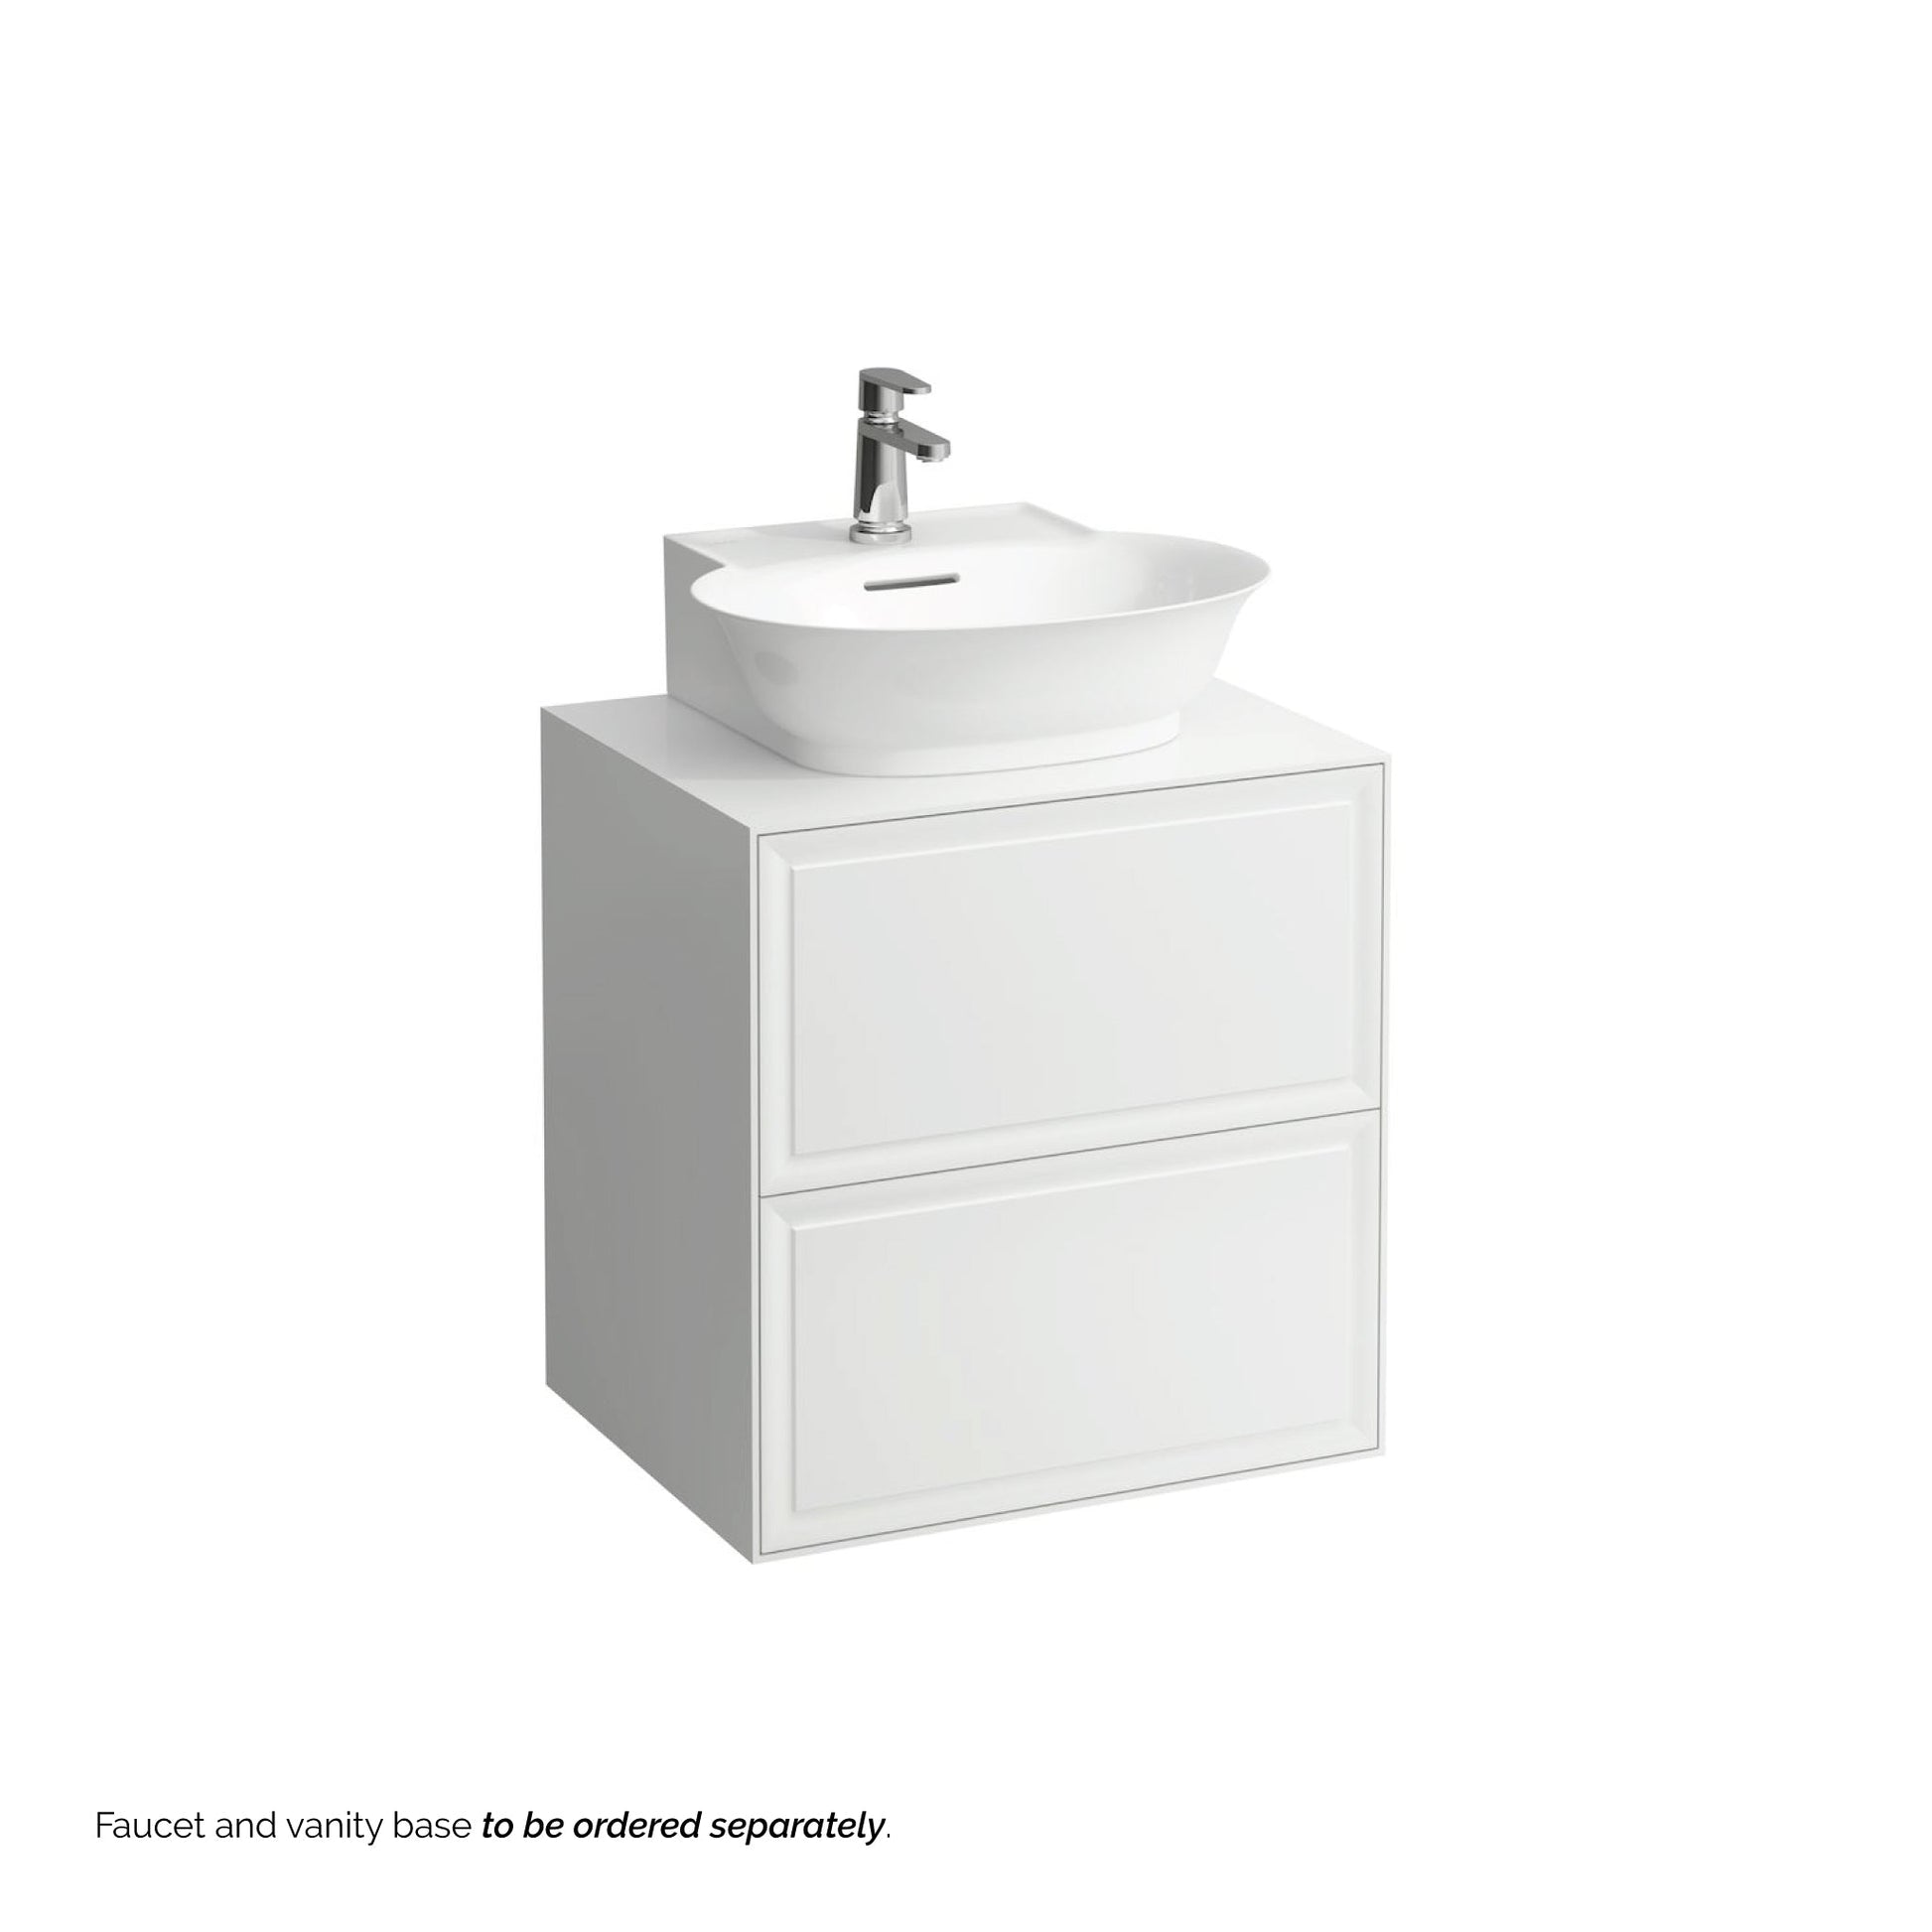 Laufen New Classic 20" x 18" White Ceramic Countertop Bathroom Sink With Faucet Hole